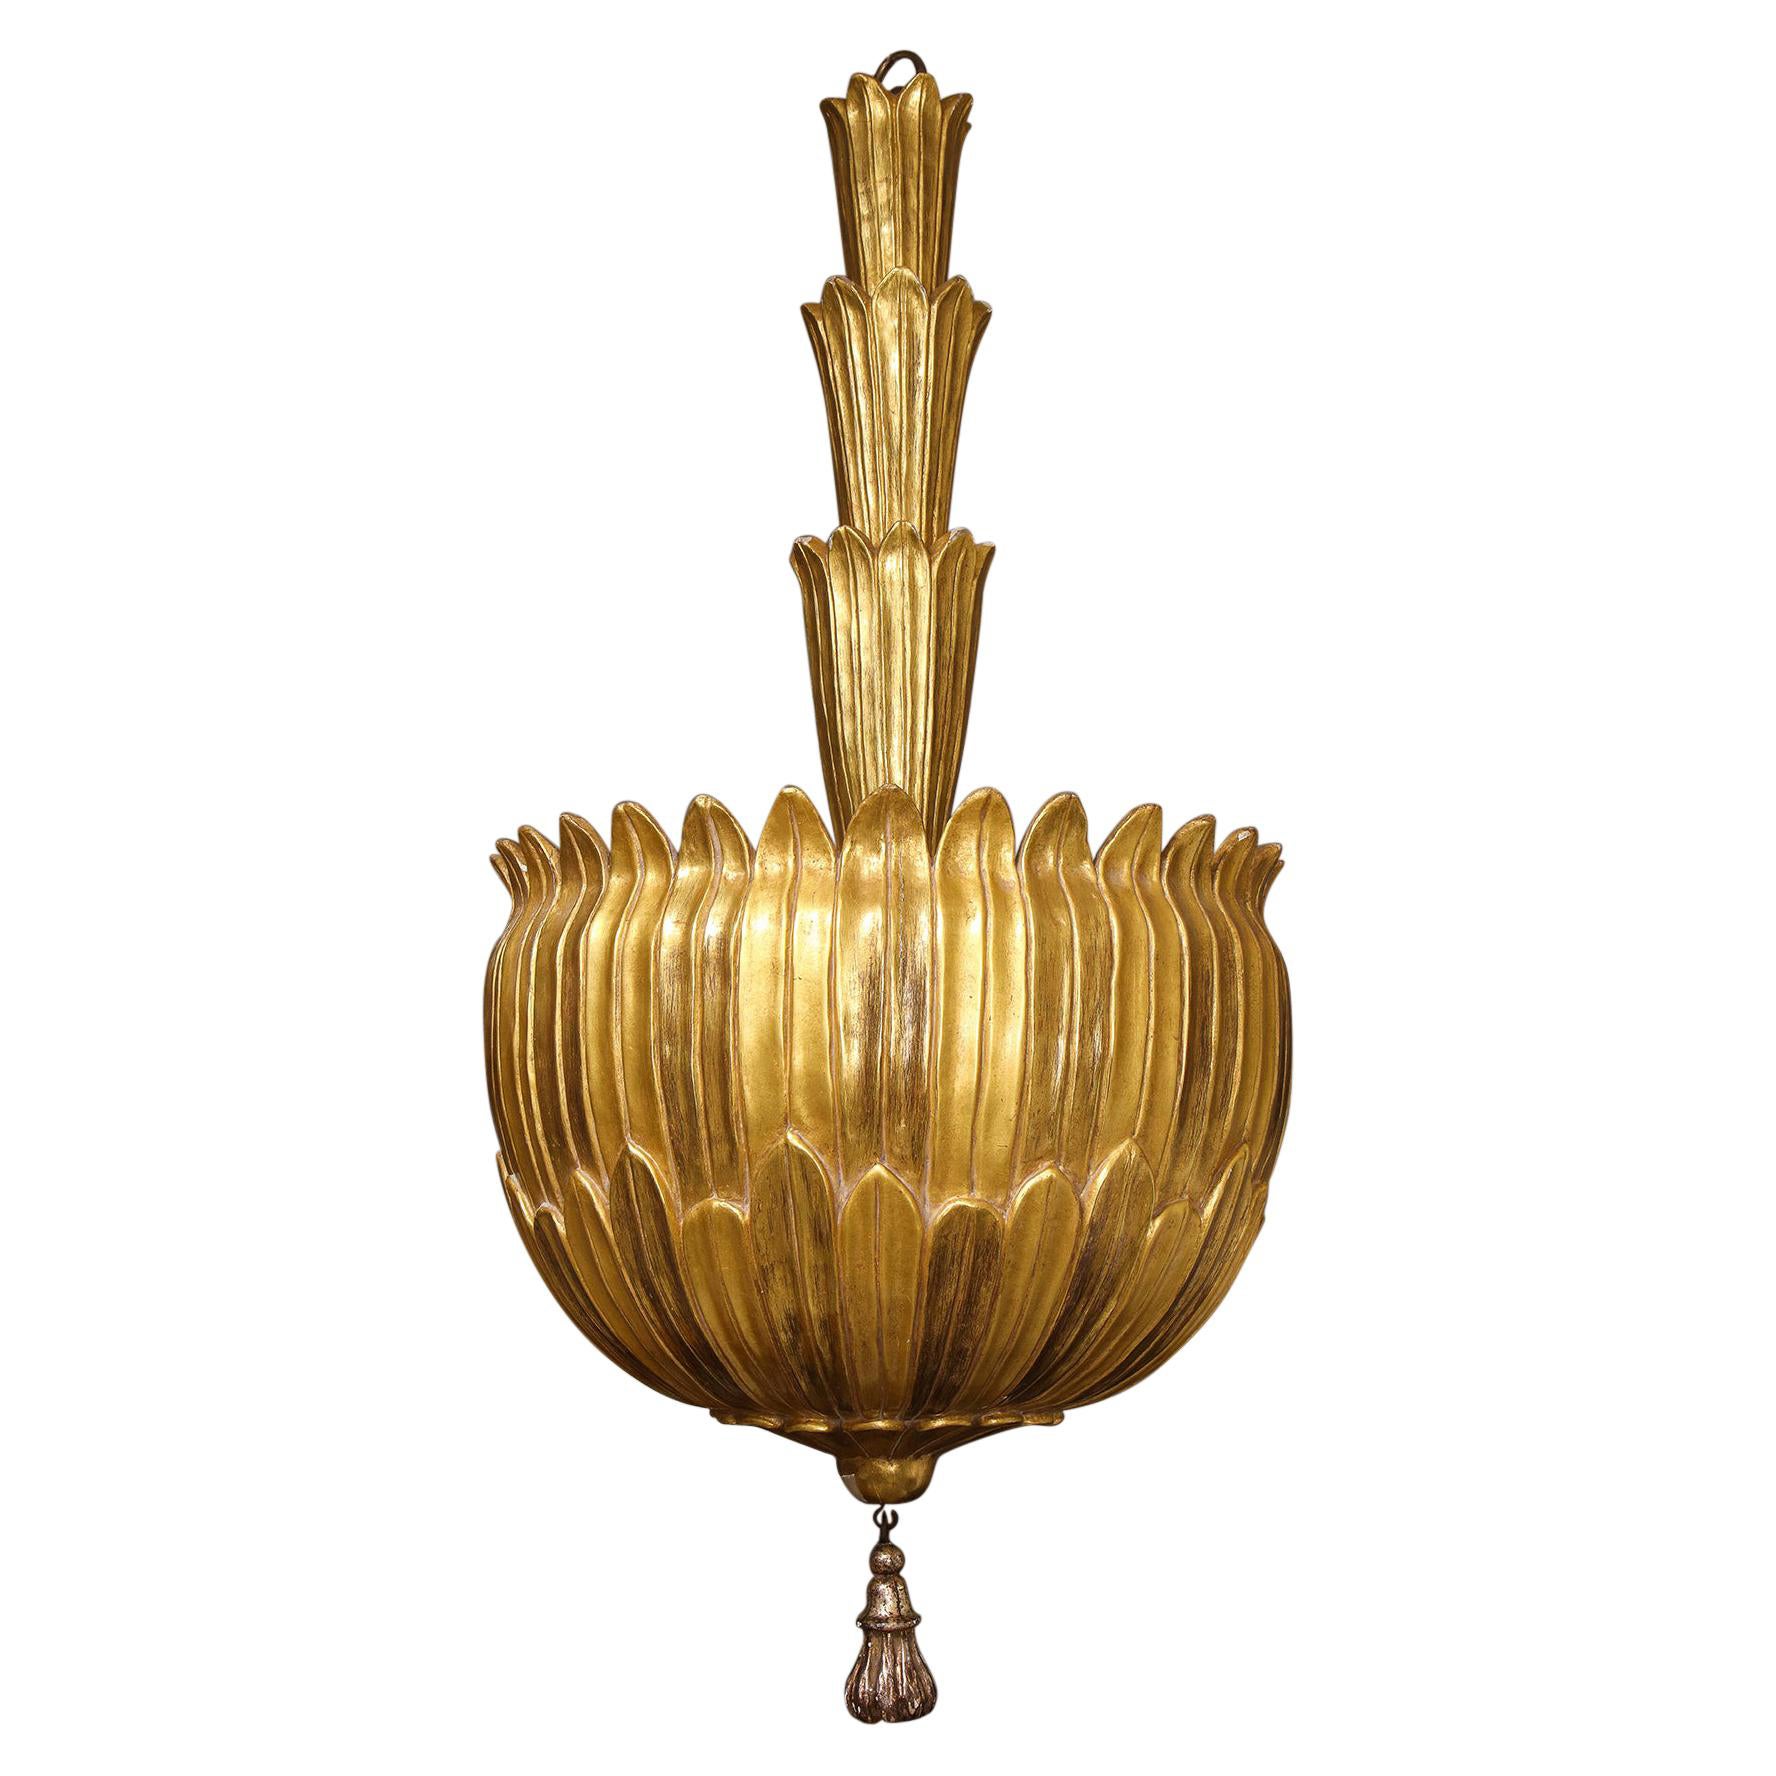 Bespoke Giltwood Hand-Carved Fixture For Sale